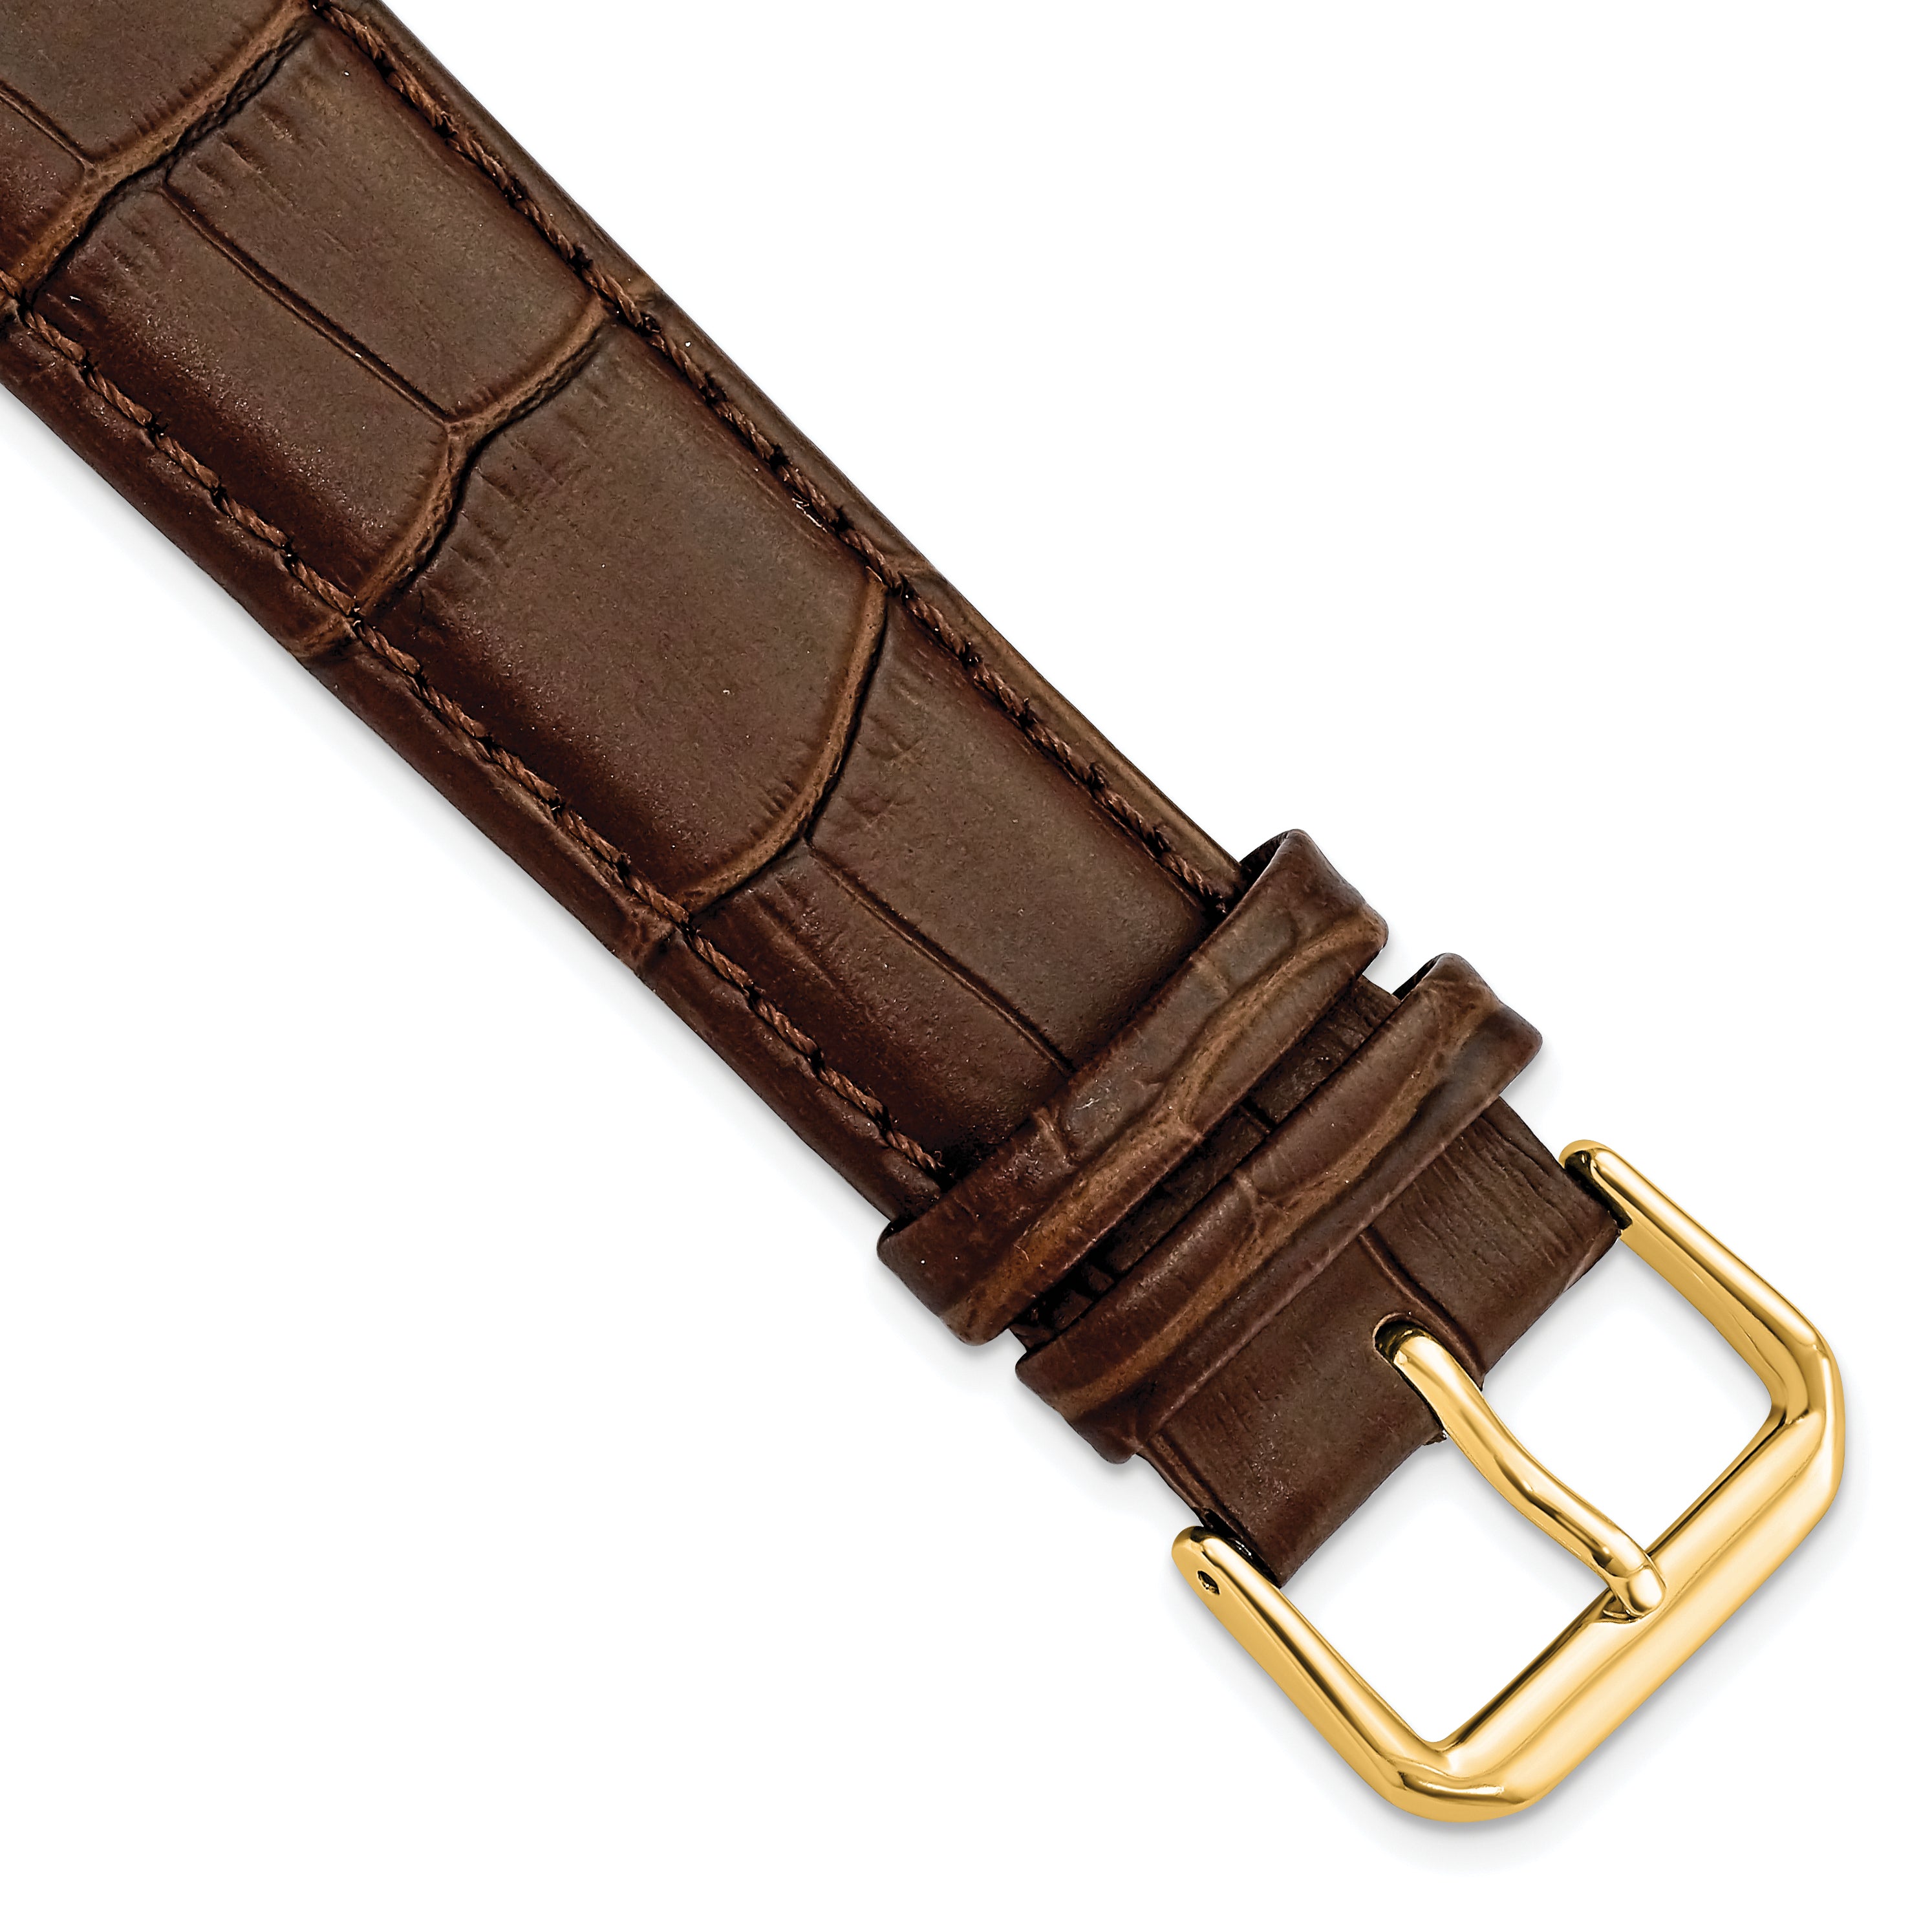 DeBeer 20mm Brown Matte Wild Alligator Grain Leather with Gold-tone Buckle 7.5 inch Watch Band